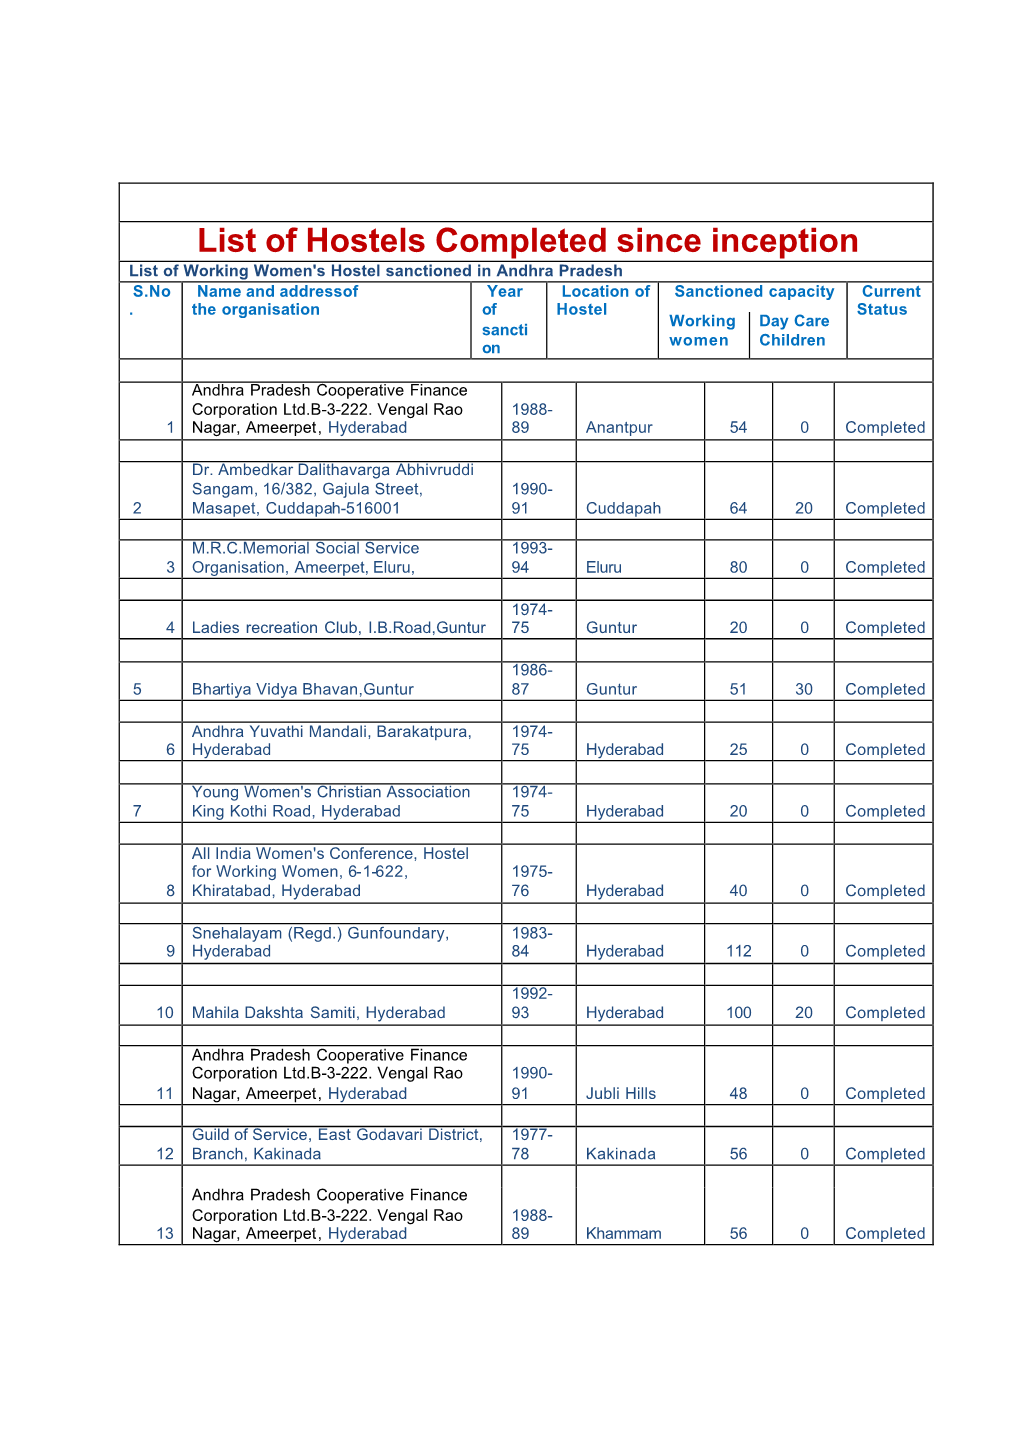 List of Hostels Completed Since Inception